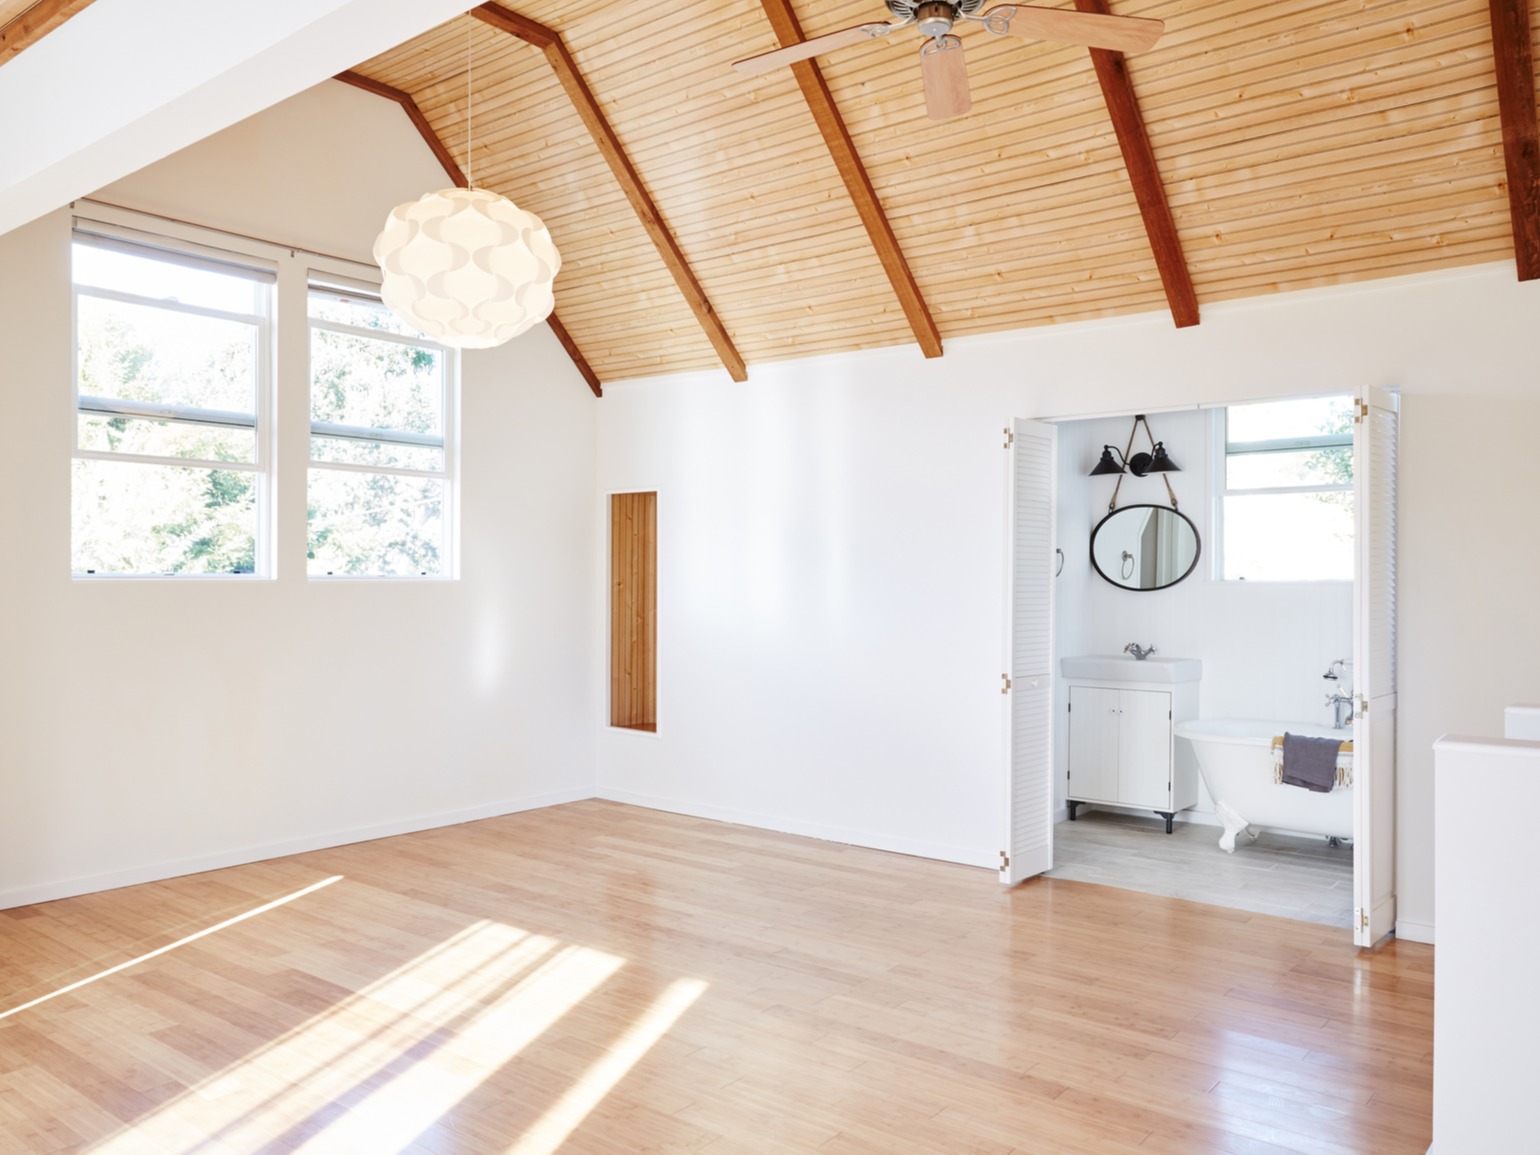 How to Repair Scratches on Bamboo Flooring